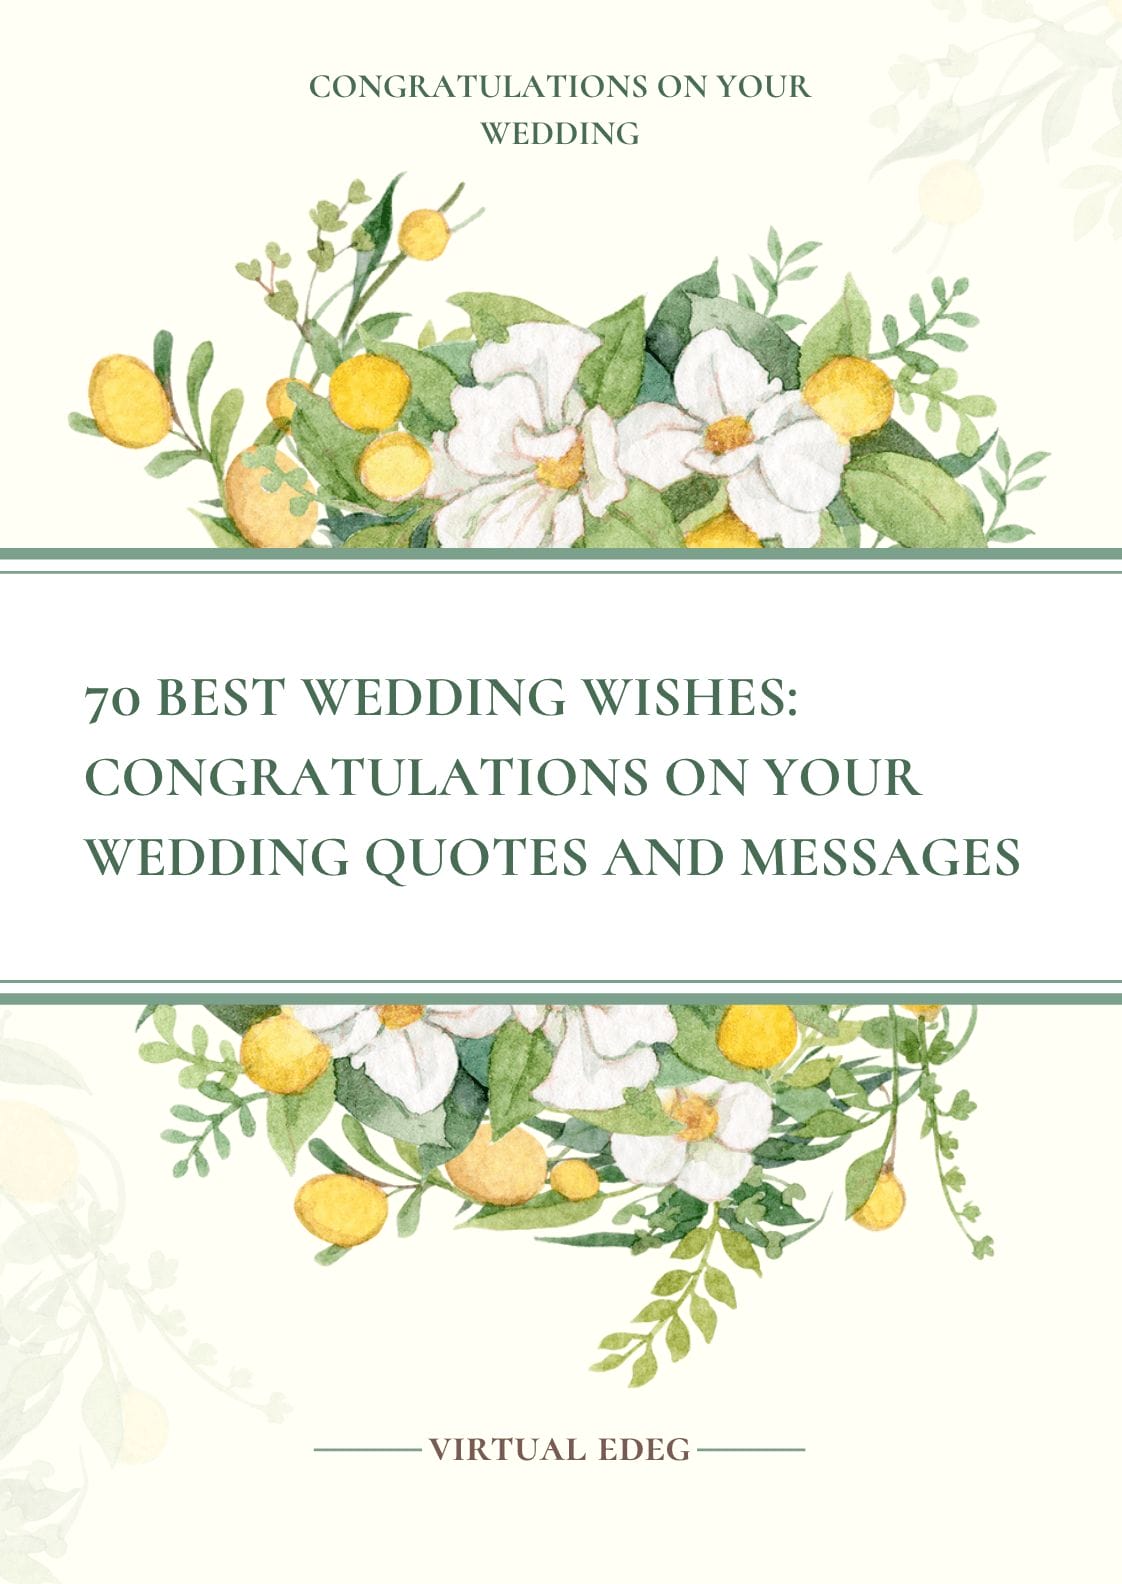 70 Best Wedding Wishes: Congratulations on Your Wedding Quotes and Messages